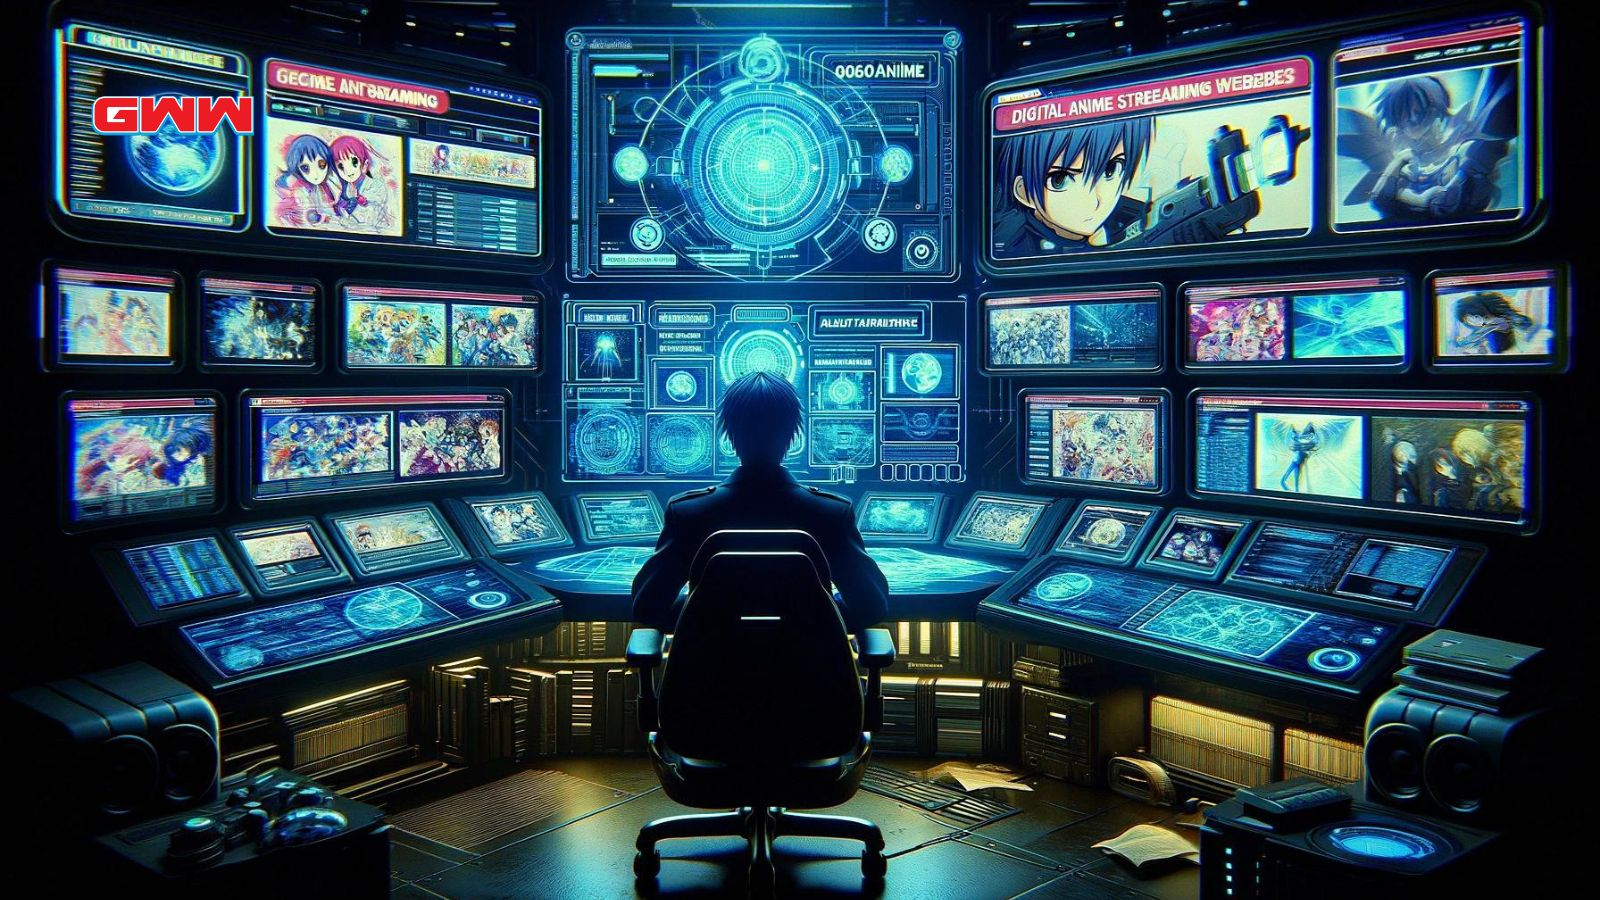 Control center with anime streaming site monitors